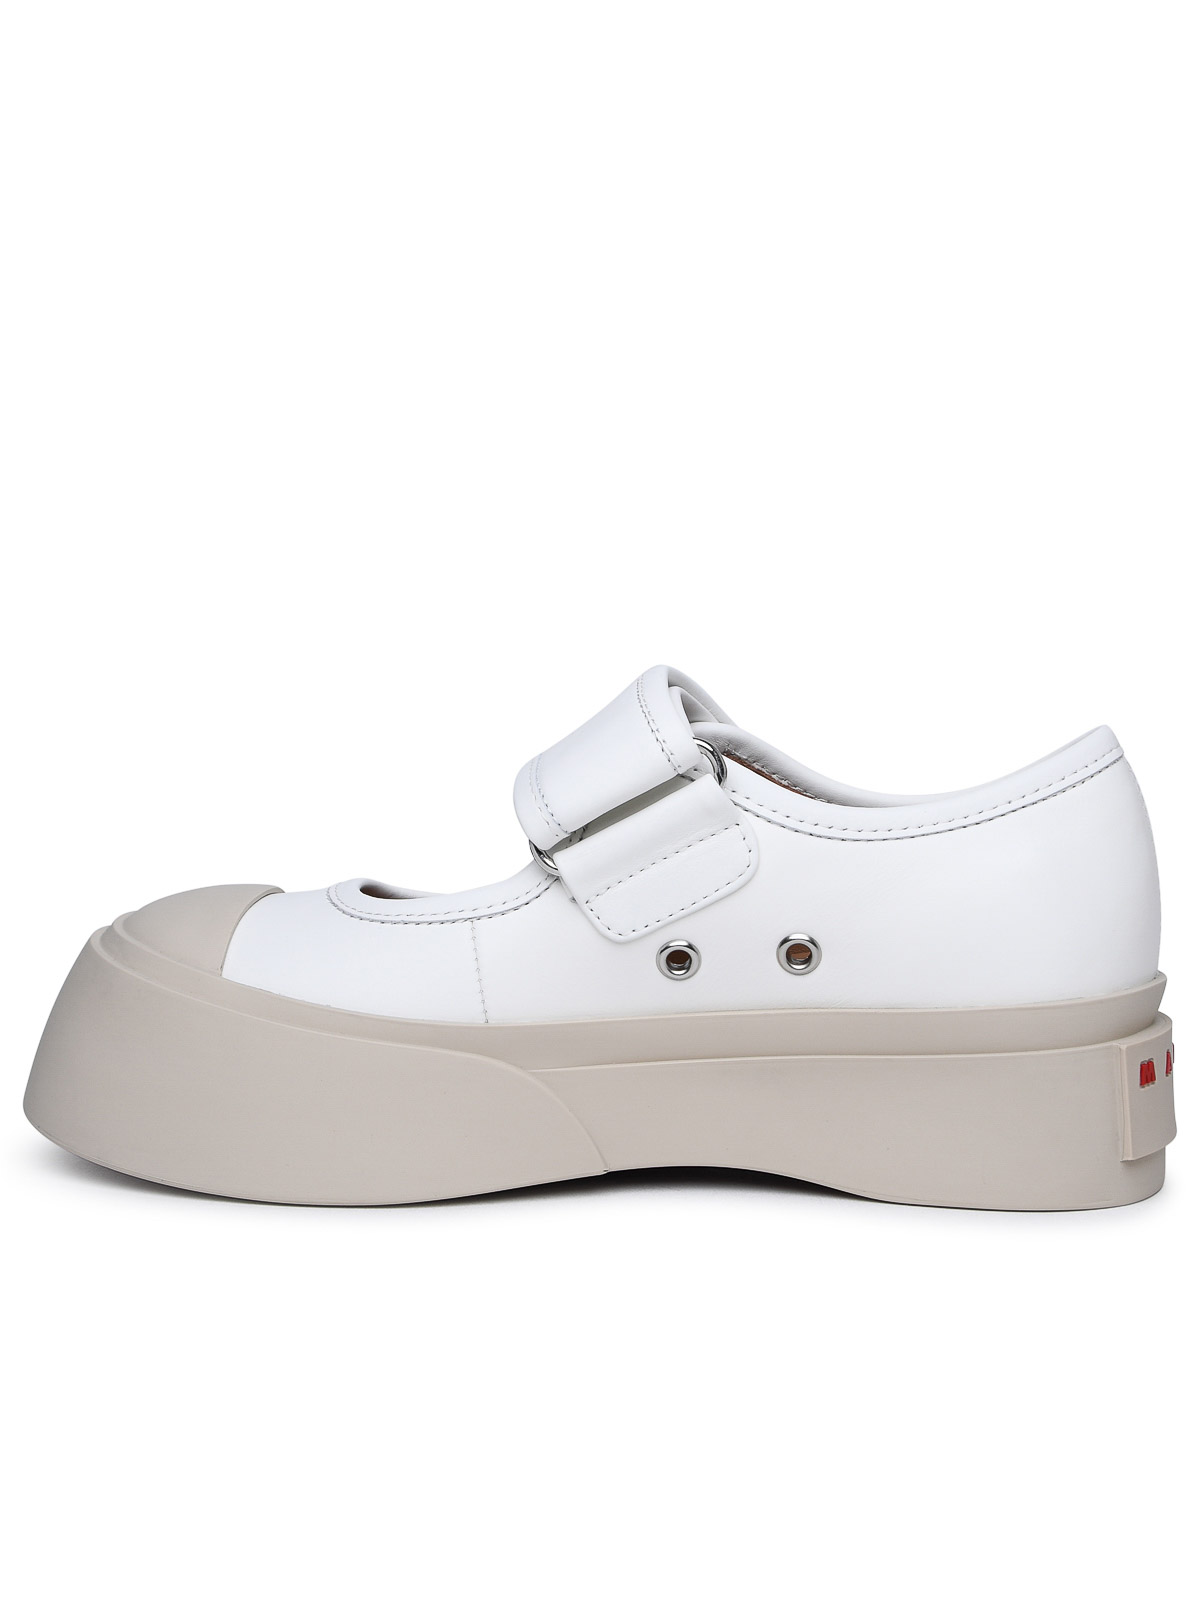 Shop Marni Mary Jane White Nappa Leather Sneakers